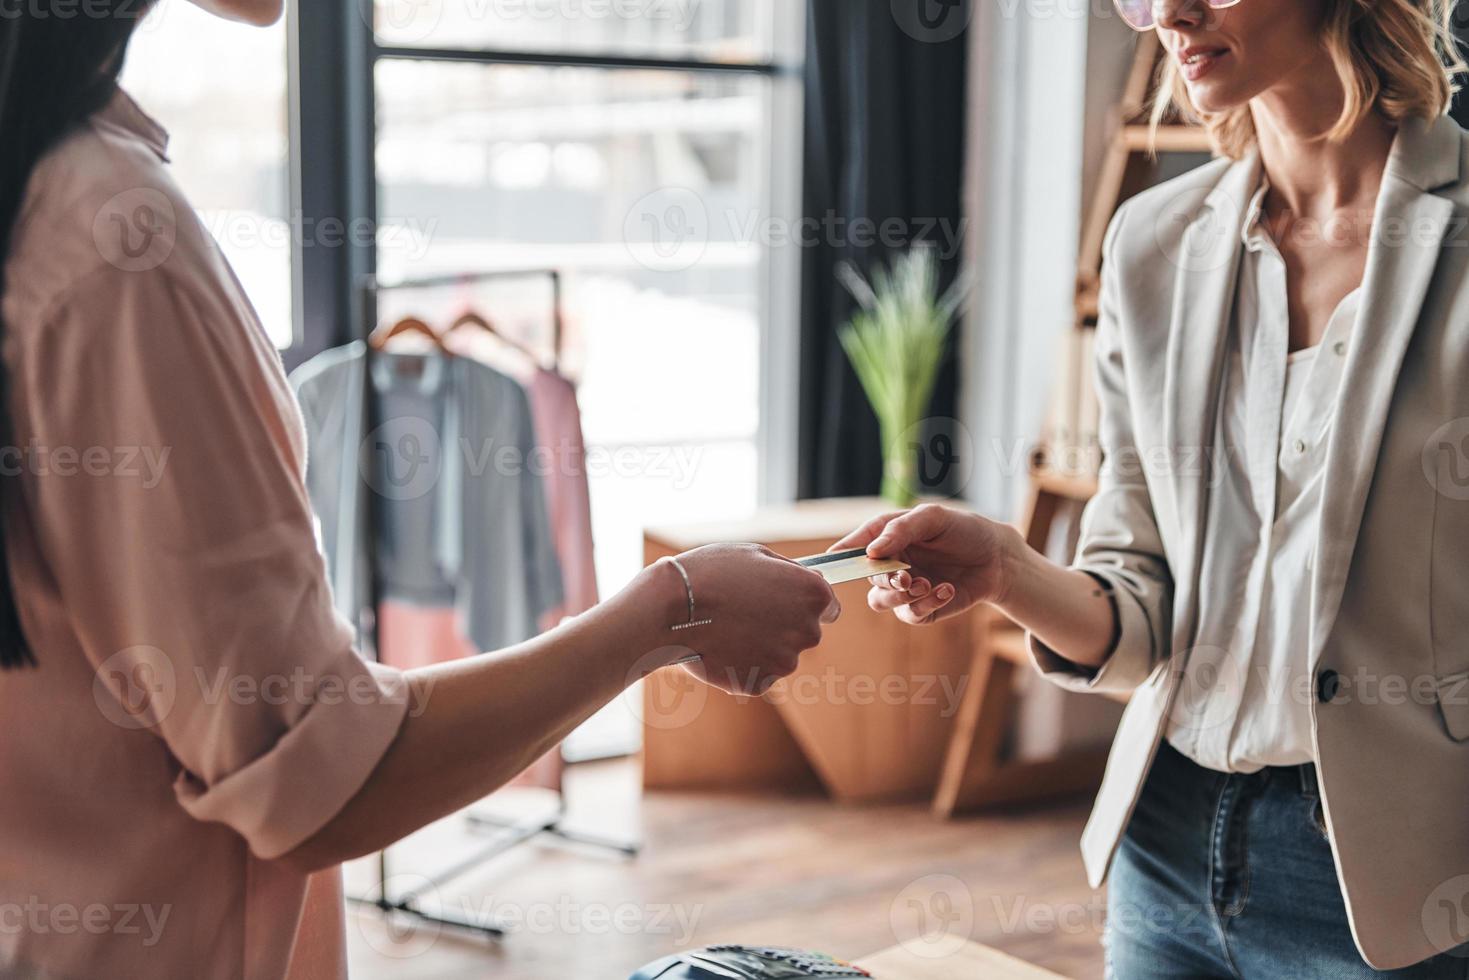 Buying and selling. Close up of young woman giving a credit card to salesperson while shopping in the fashion boutique photo